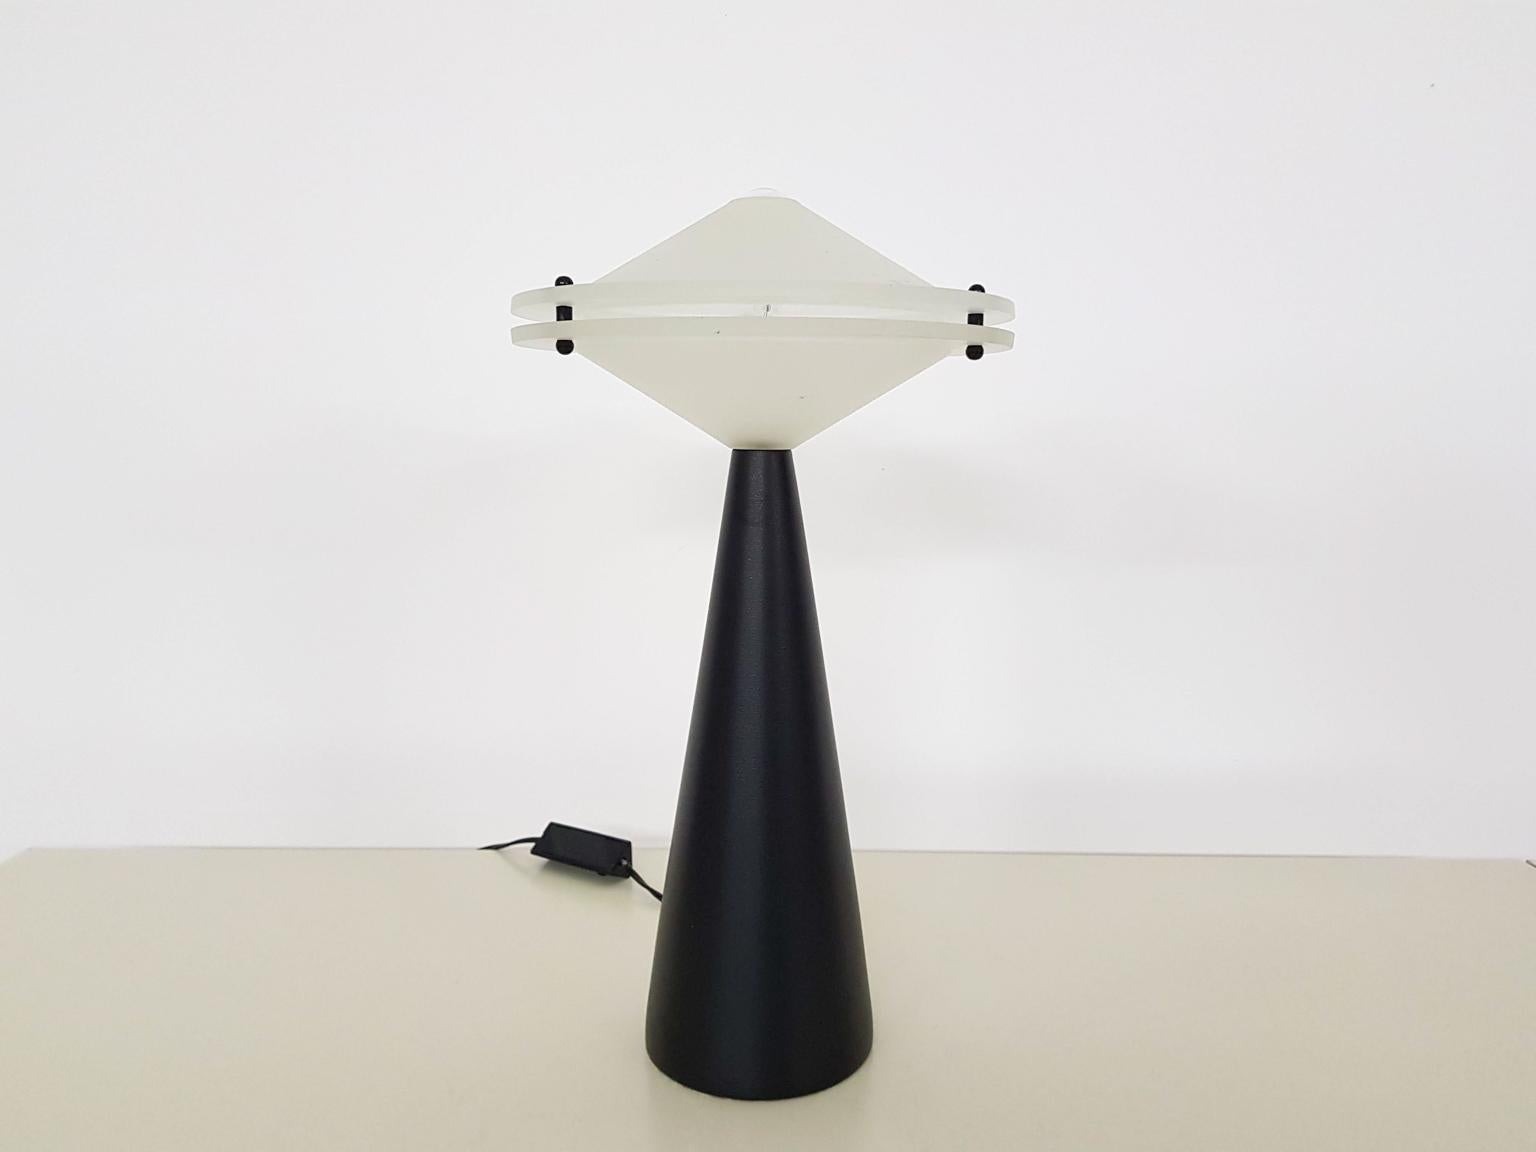 Cesaro L. for Tre CI attributed to Alien dimmable table light, Italy, 1980s

Modernist table lamp made of a heavy metal base and a thick opaline glass shade. It is almost the same as the “Alien” table light designed by Cesaro L. for Tre CI Luce in